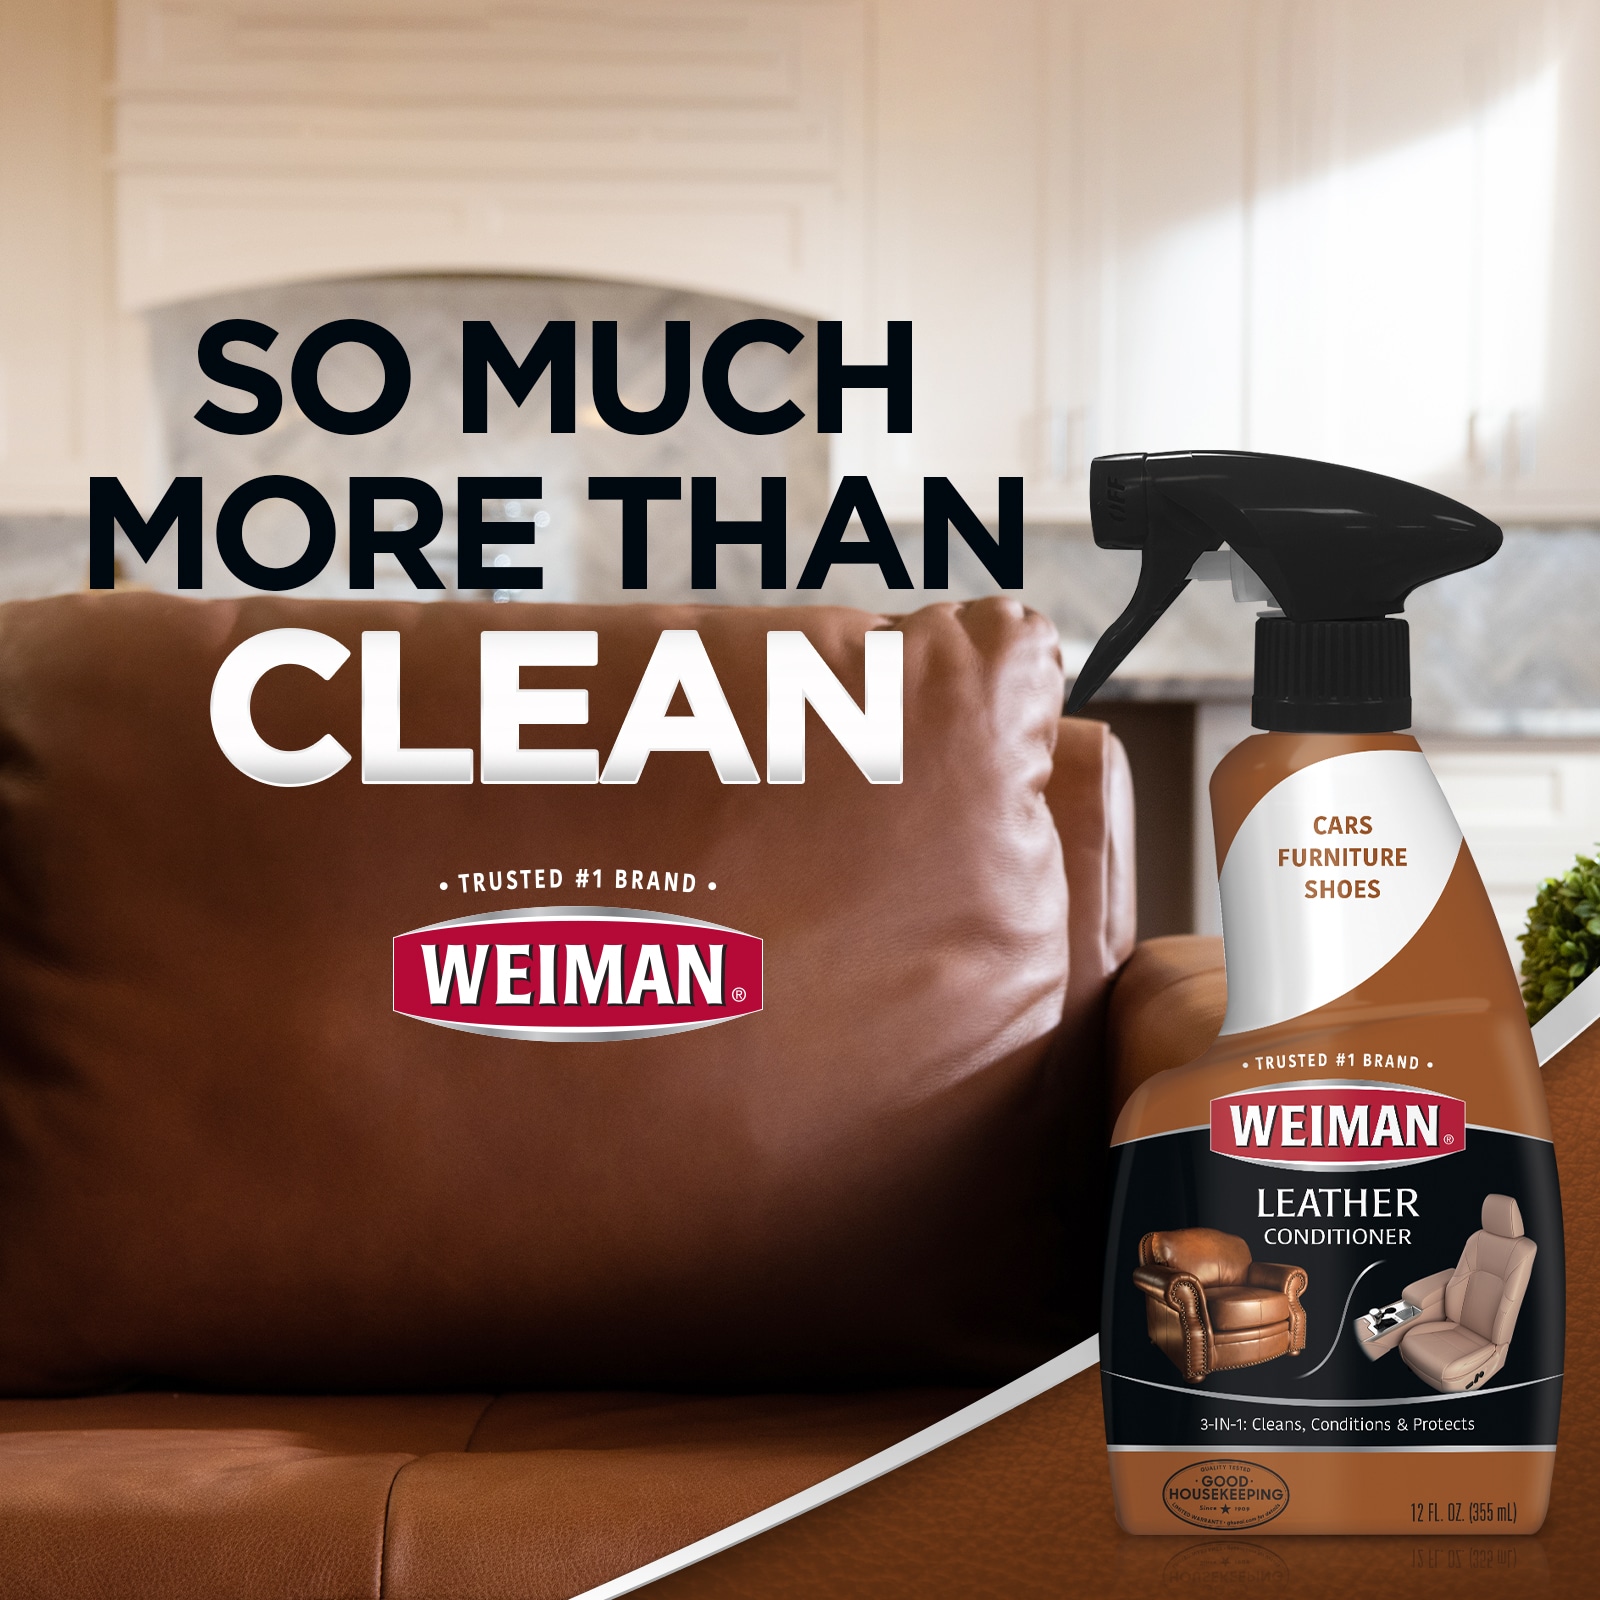 Weiman Wood Cleaner and Polish Wipes - 2 Pack - Non-Toxic for Furniture to Beautify and Protect, No Build-Up, Contains Ultra